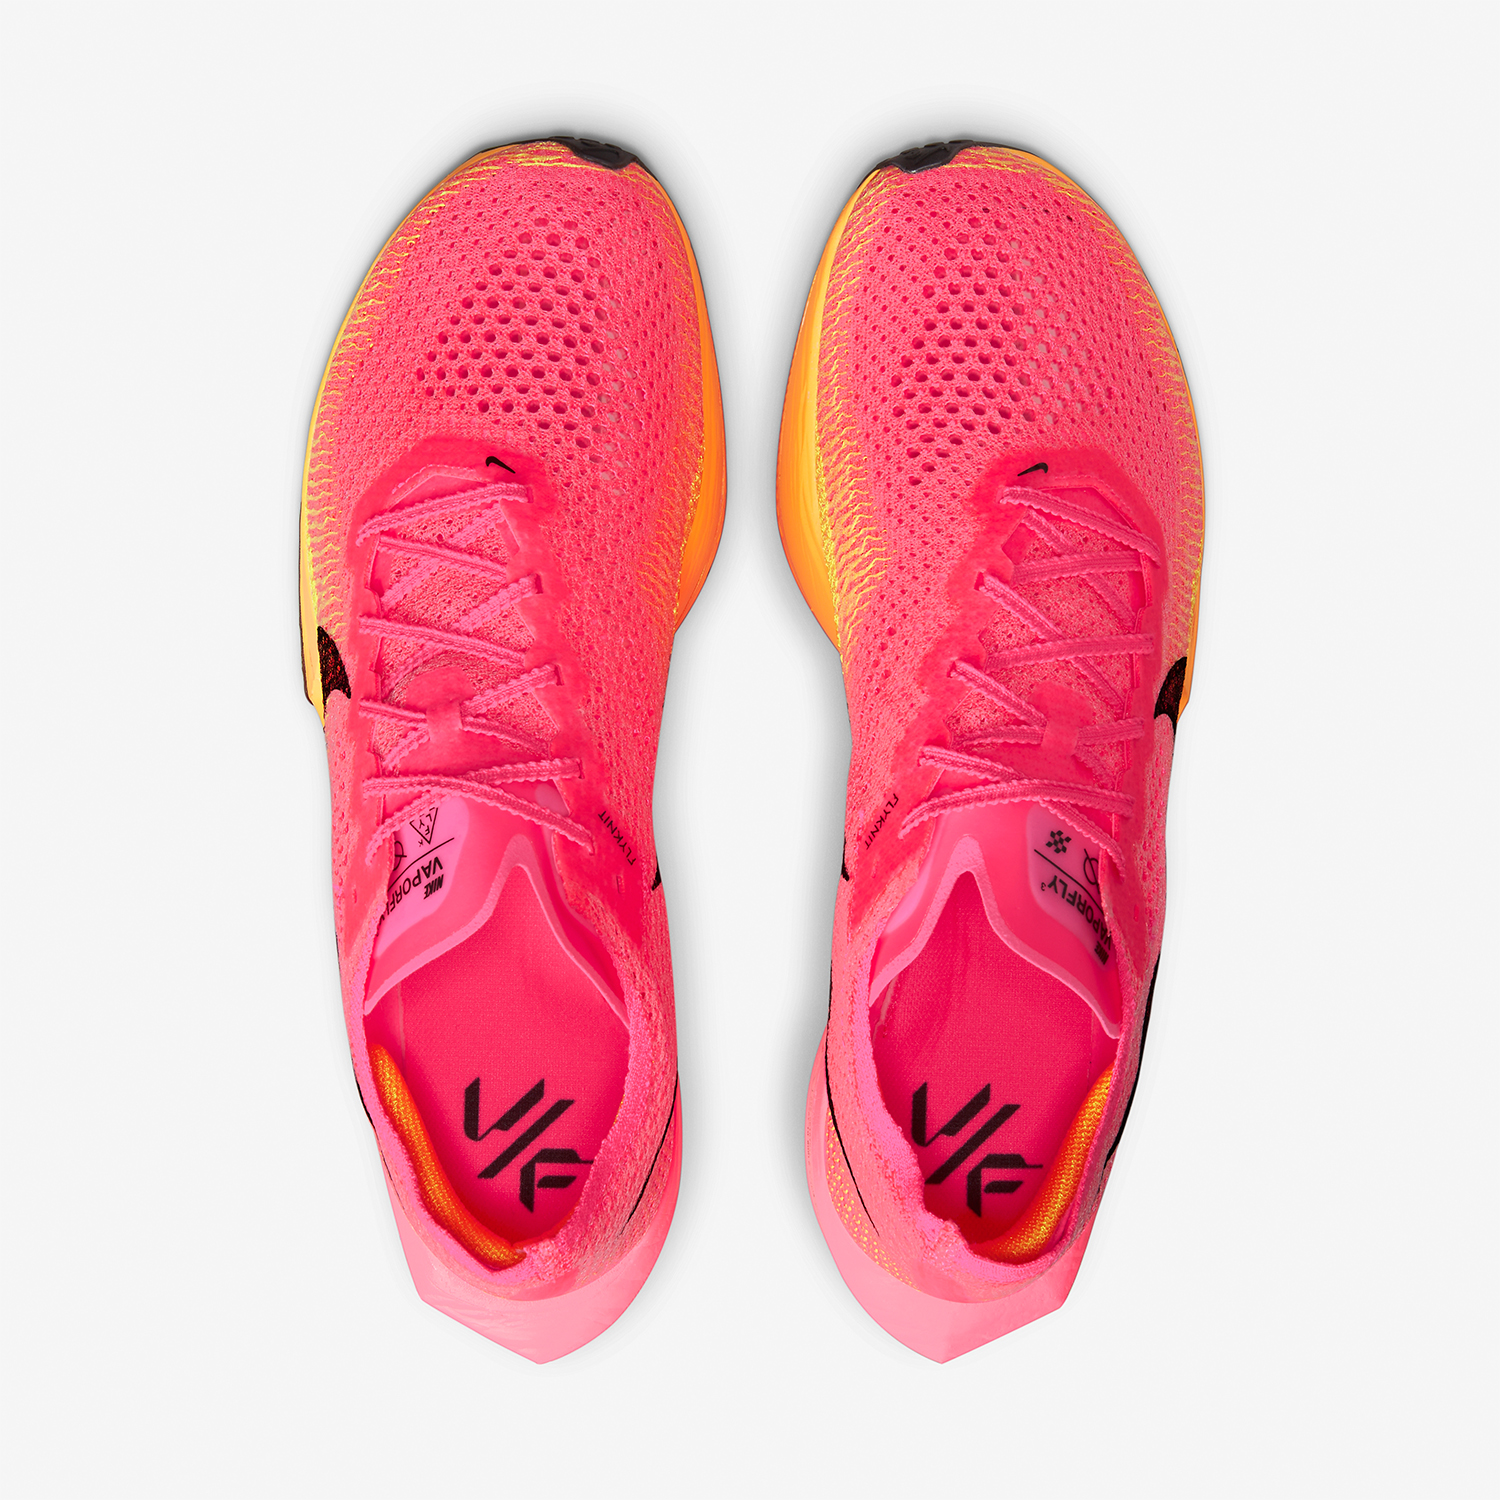 Nike ZoomX Vaporfly Next% 3 Men's Running Shoes - Pink